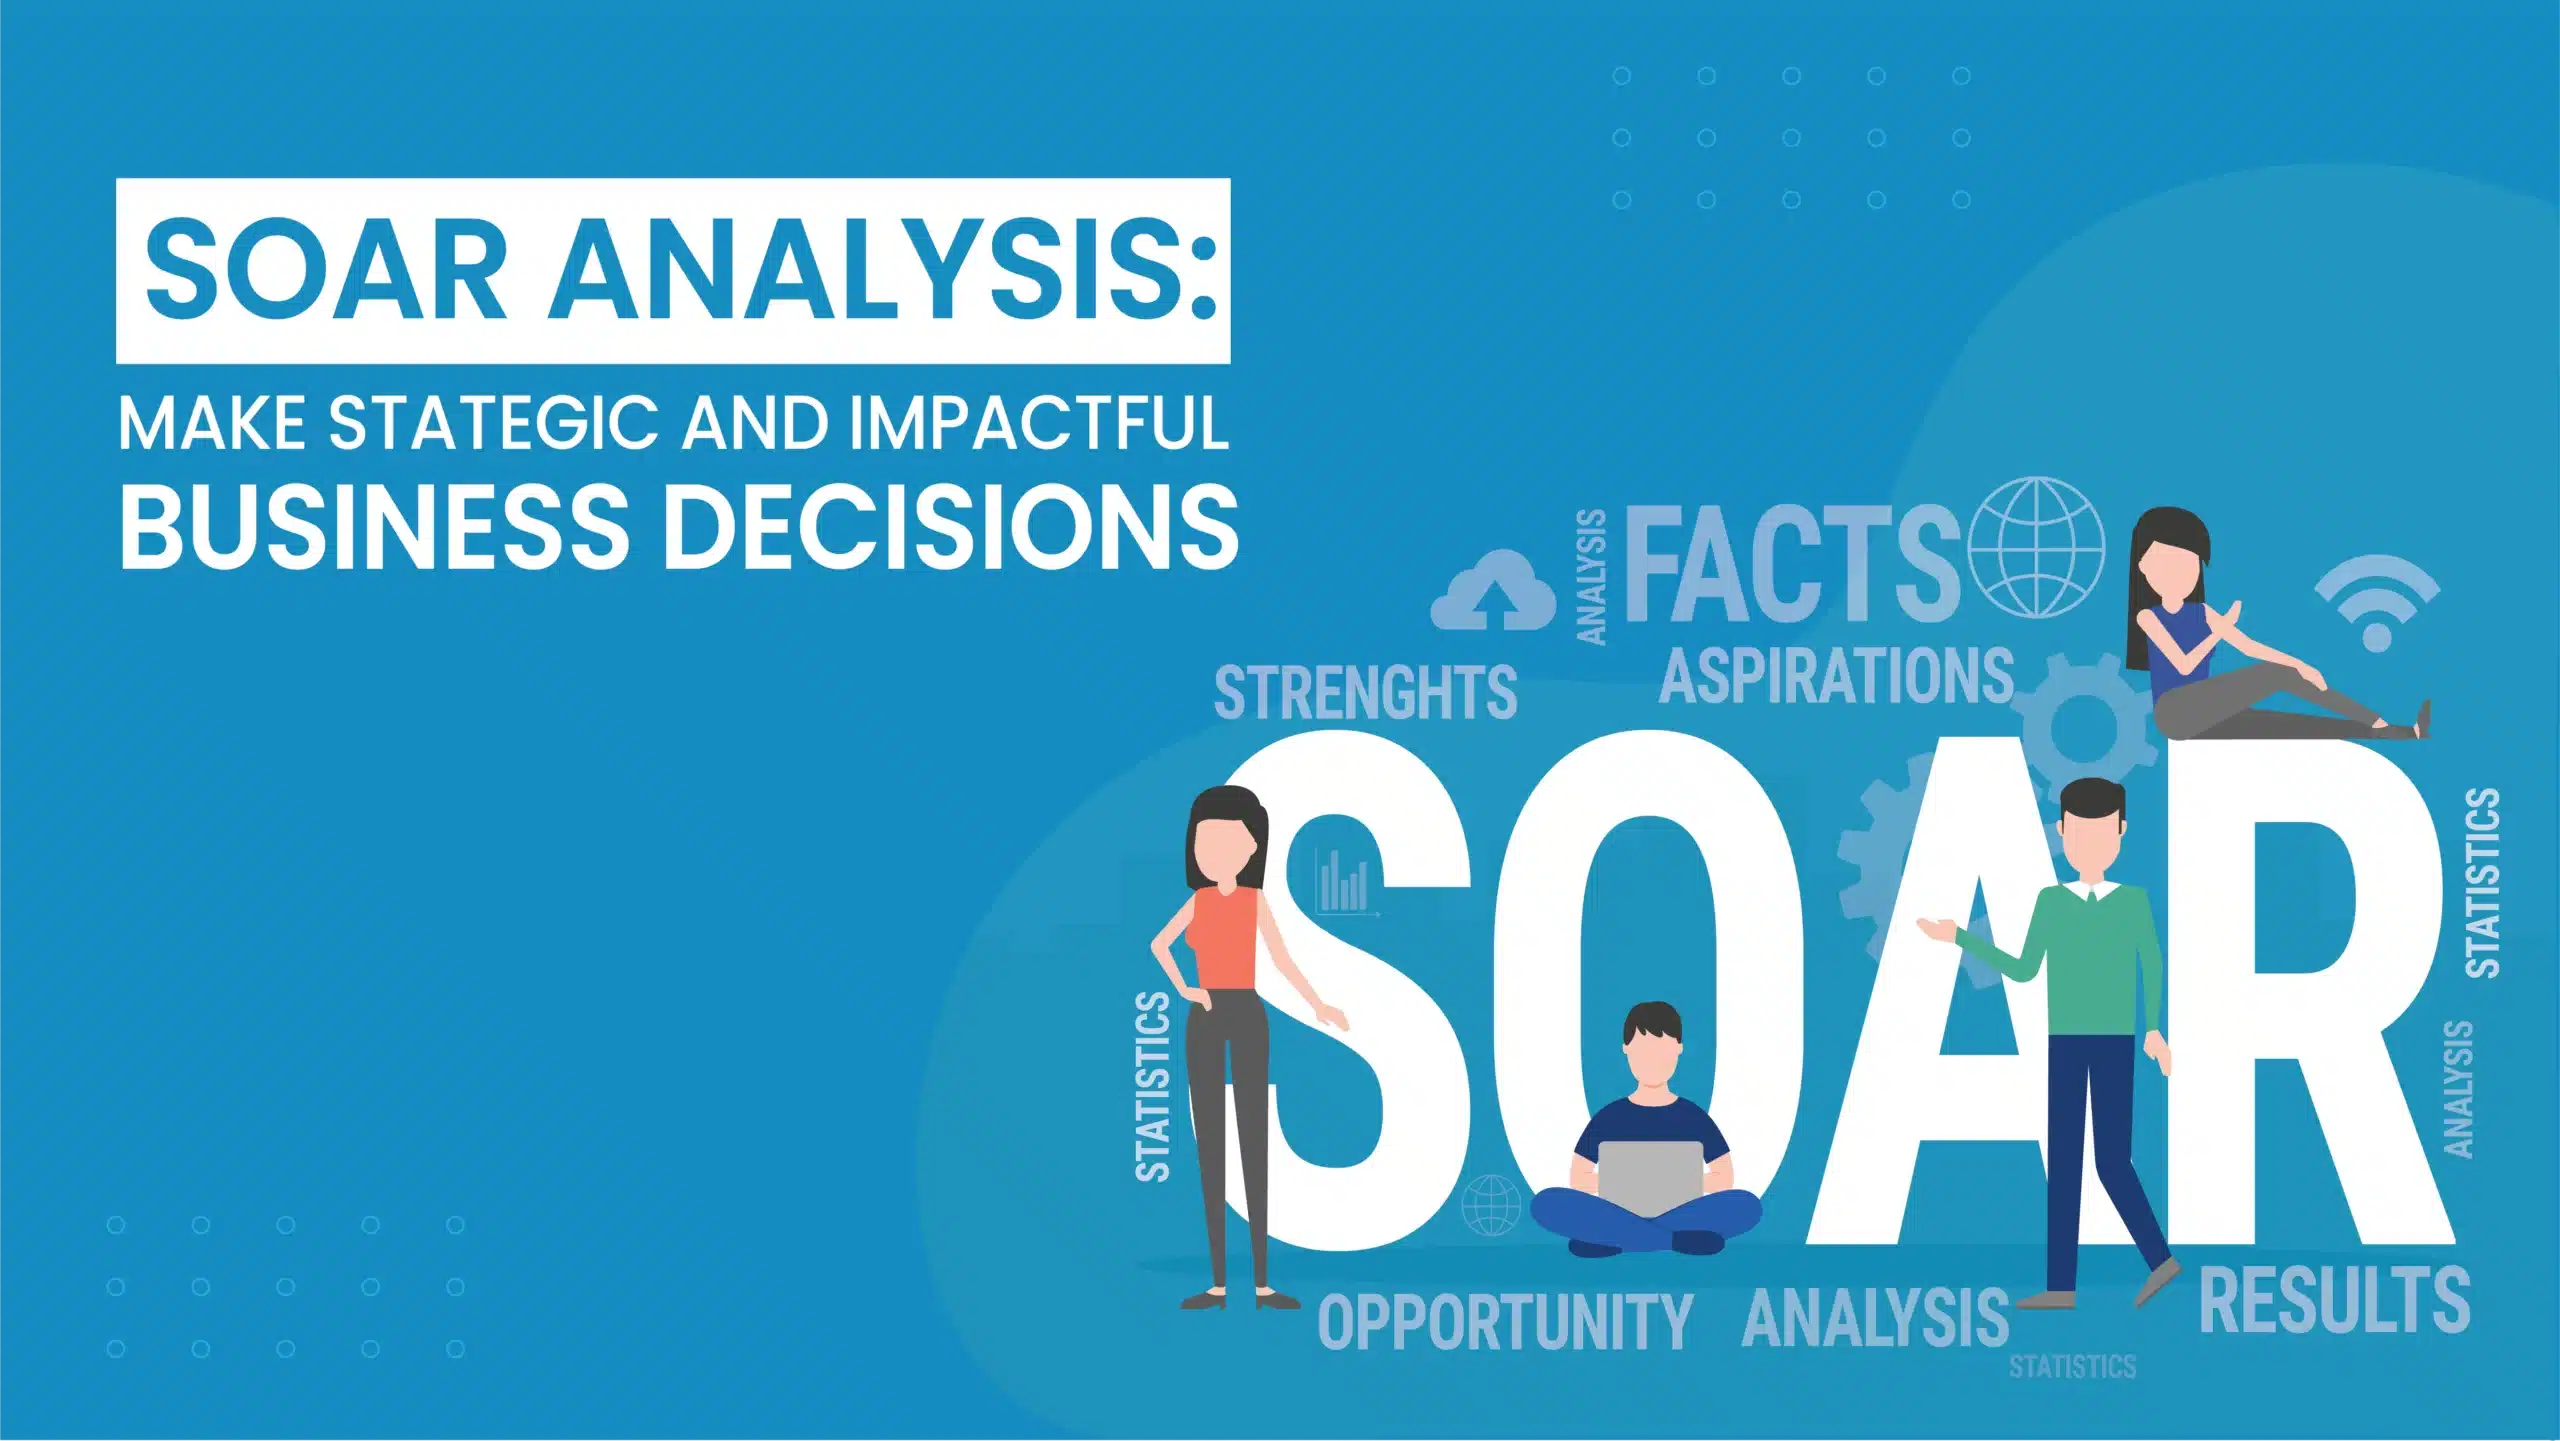 SOAR Analysis: Make Strategic and Impactful Business Decisions